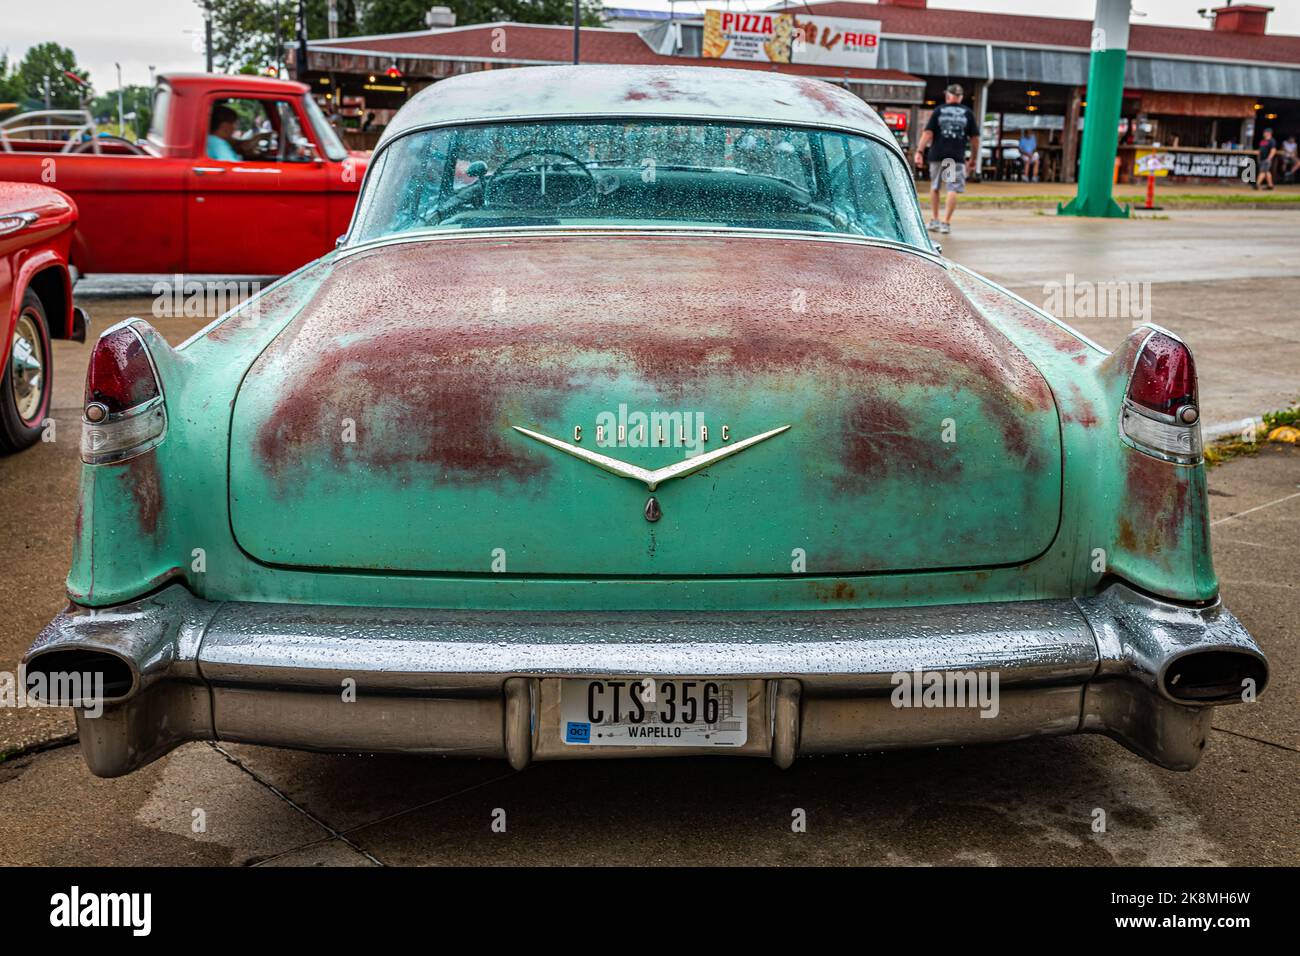 Des Moines, IA - July 01, 2022: High perspective rear view of a 1956 Cadillac 62 Sedan DeVille at a local car show. Stock Photo